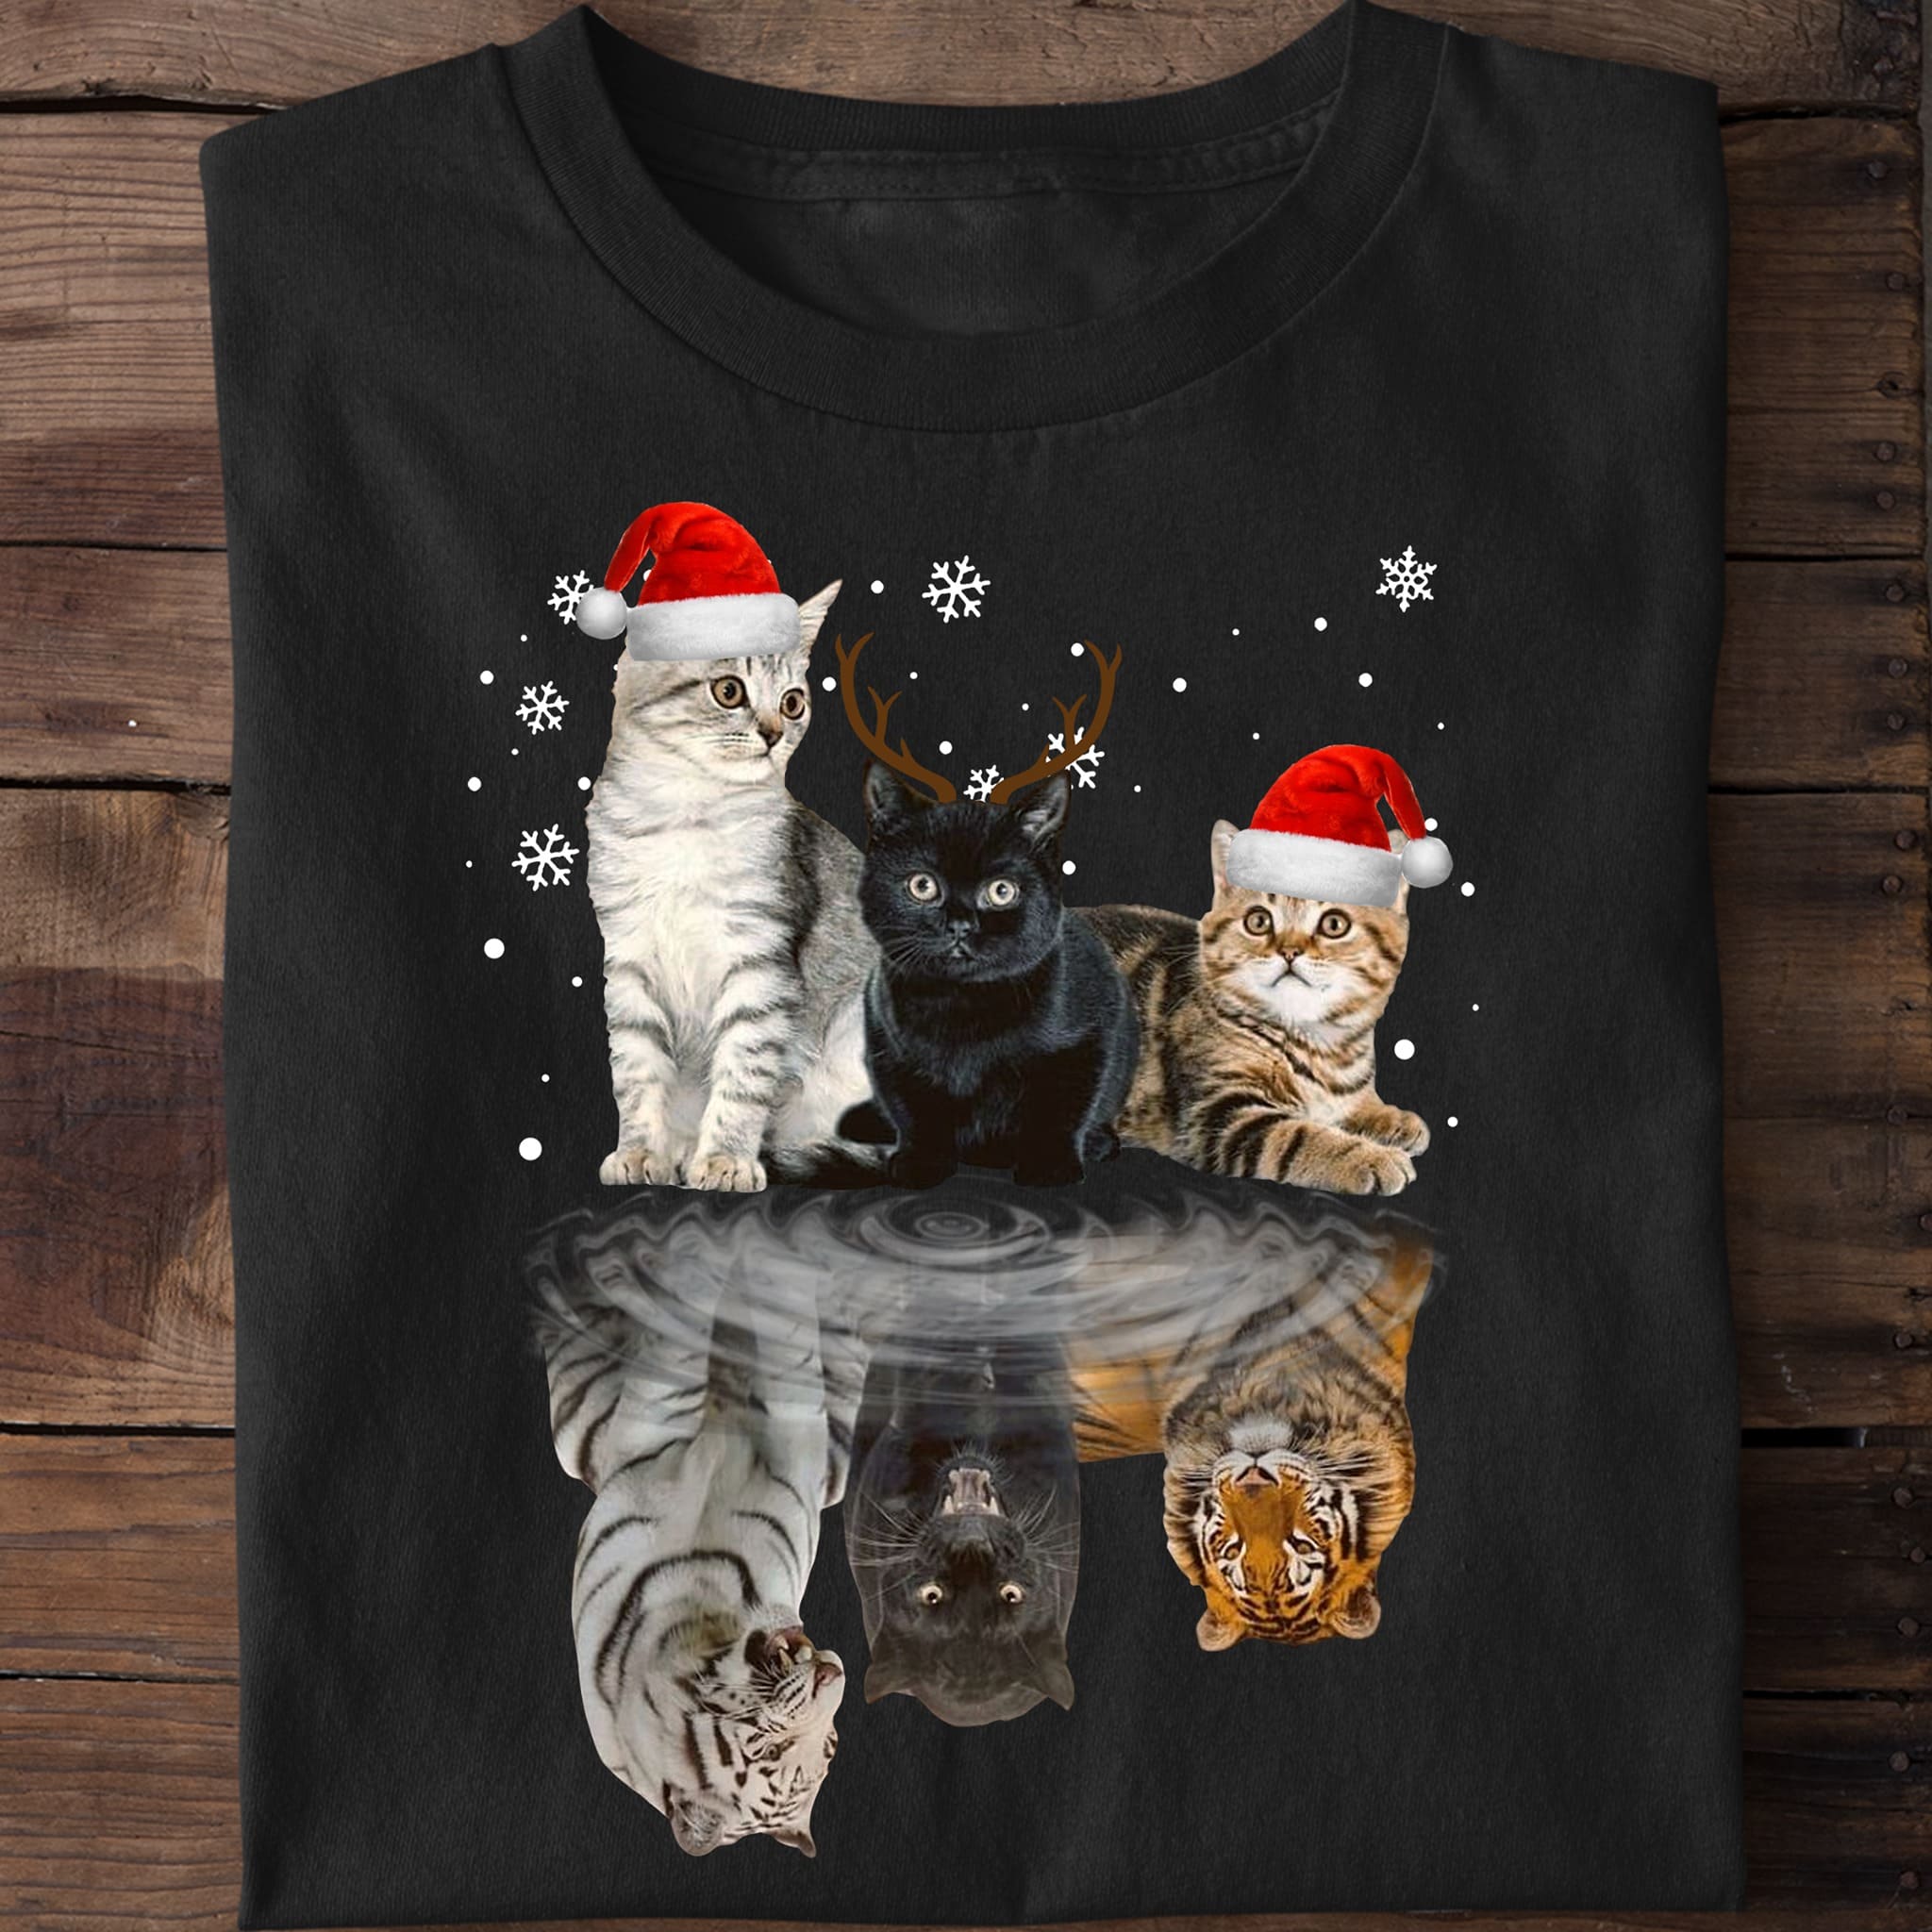 Tiger and cat - Cat reflection, gift for cat people